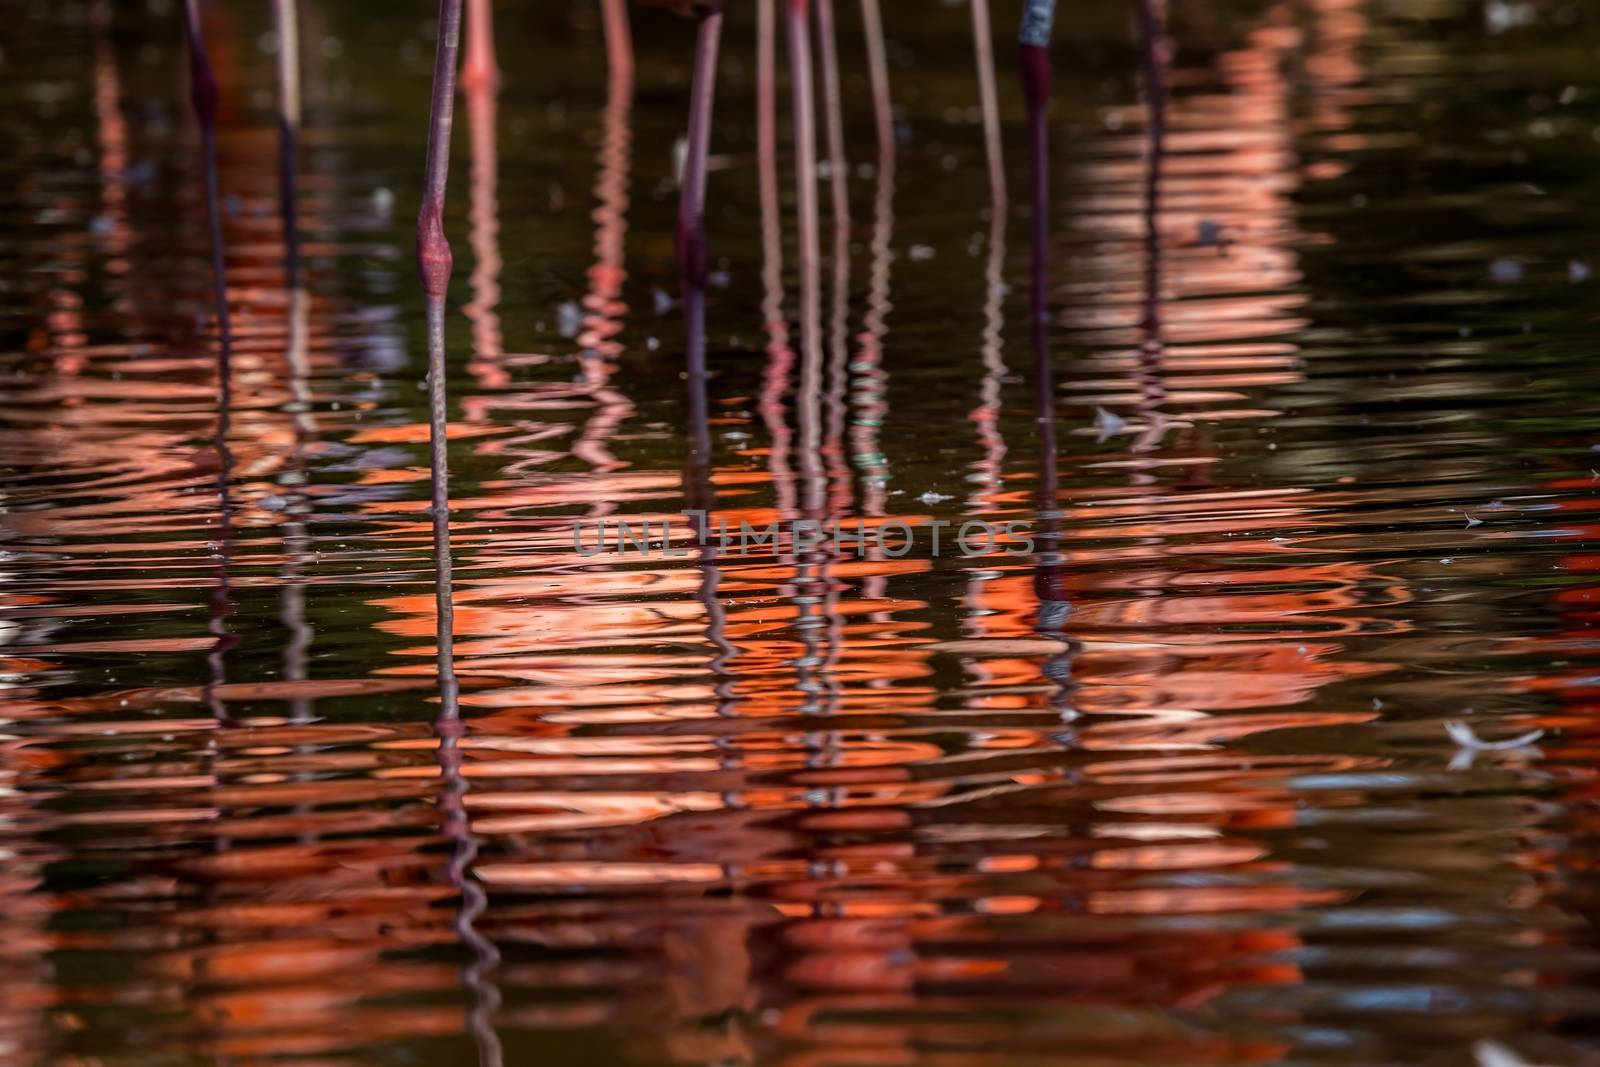 Flamingos reflection on the water